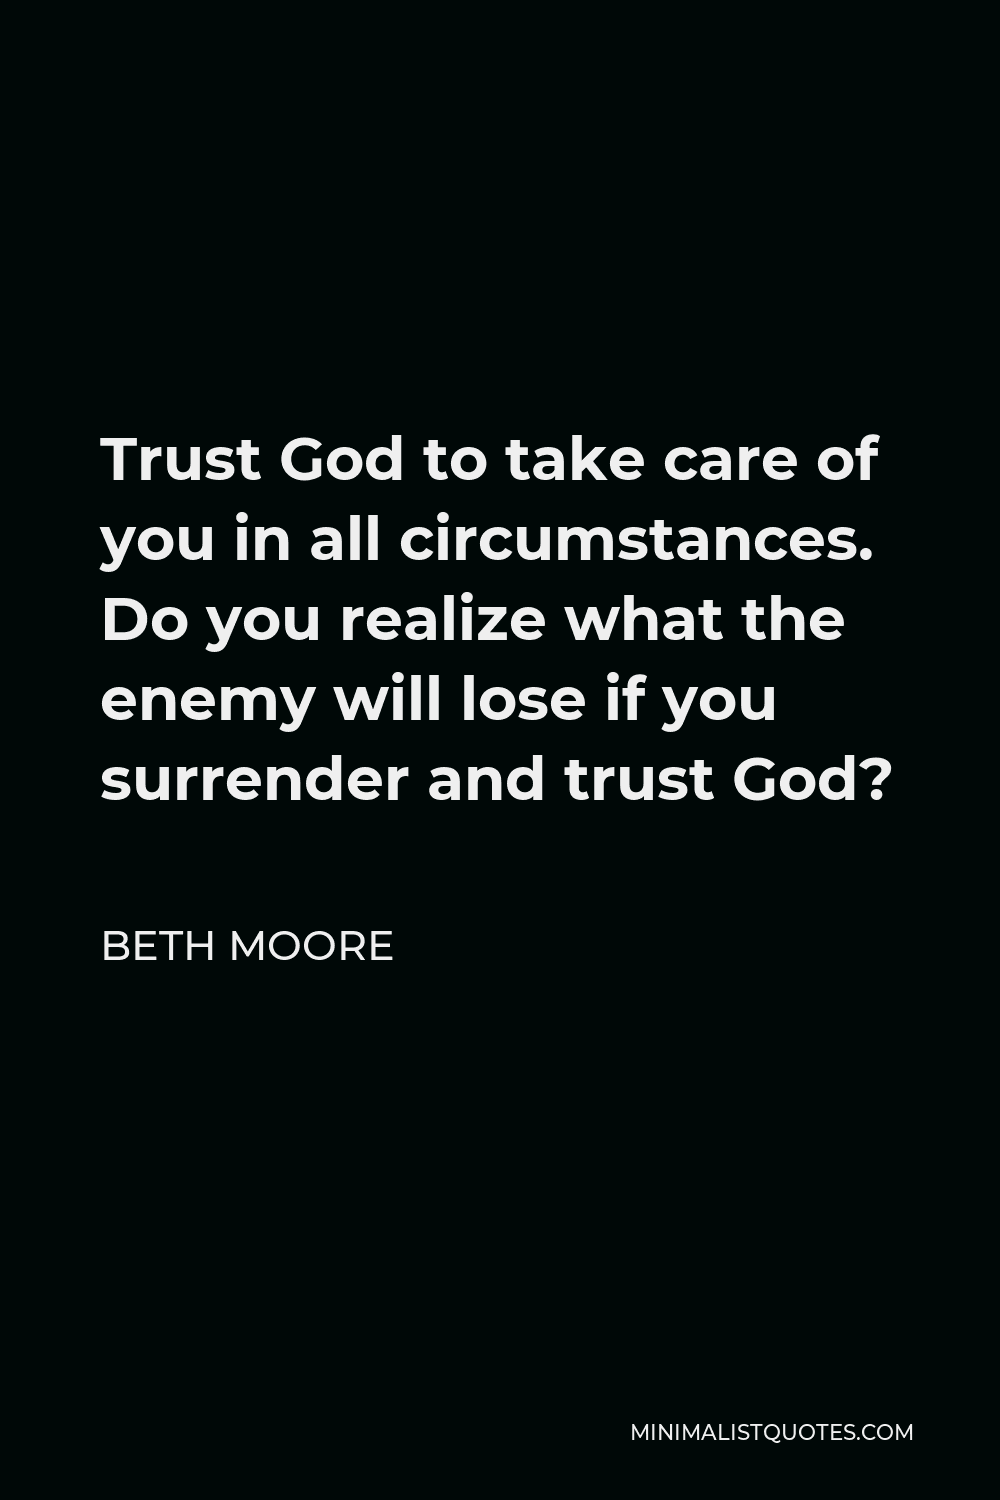 Beth Moore Quote - Trust God to take care of you in all circumstances. Do you realize what the enemy will lose if you surrender and trust God?